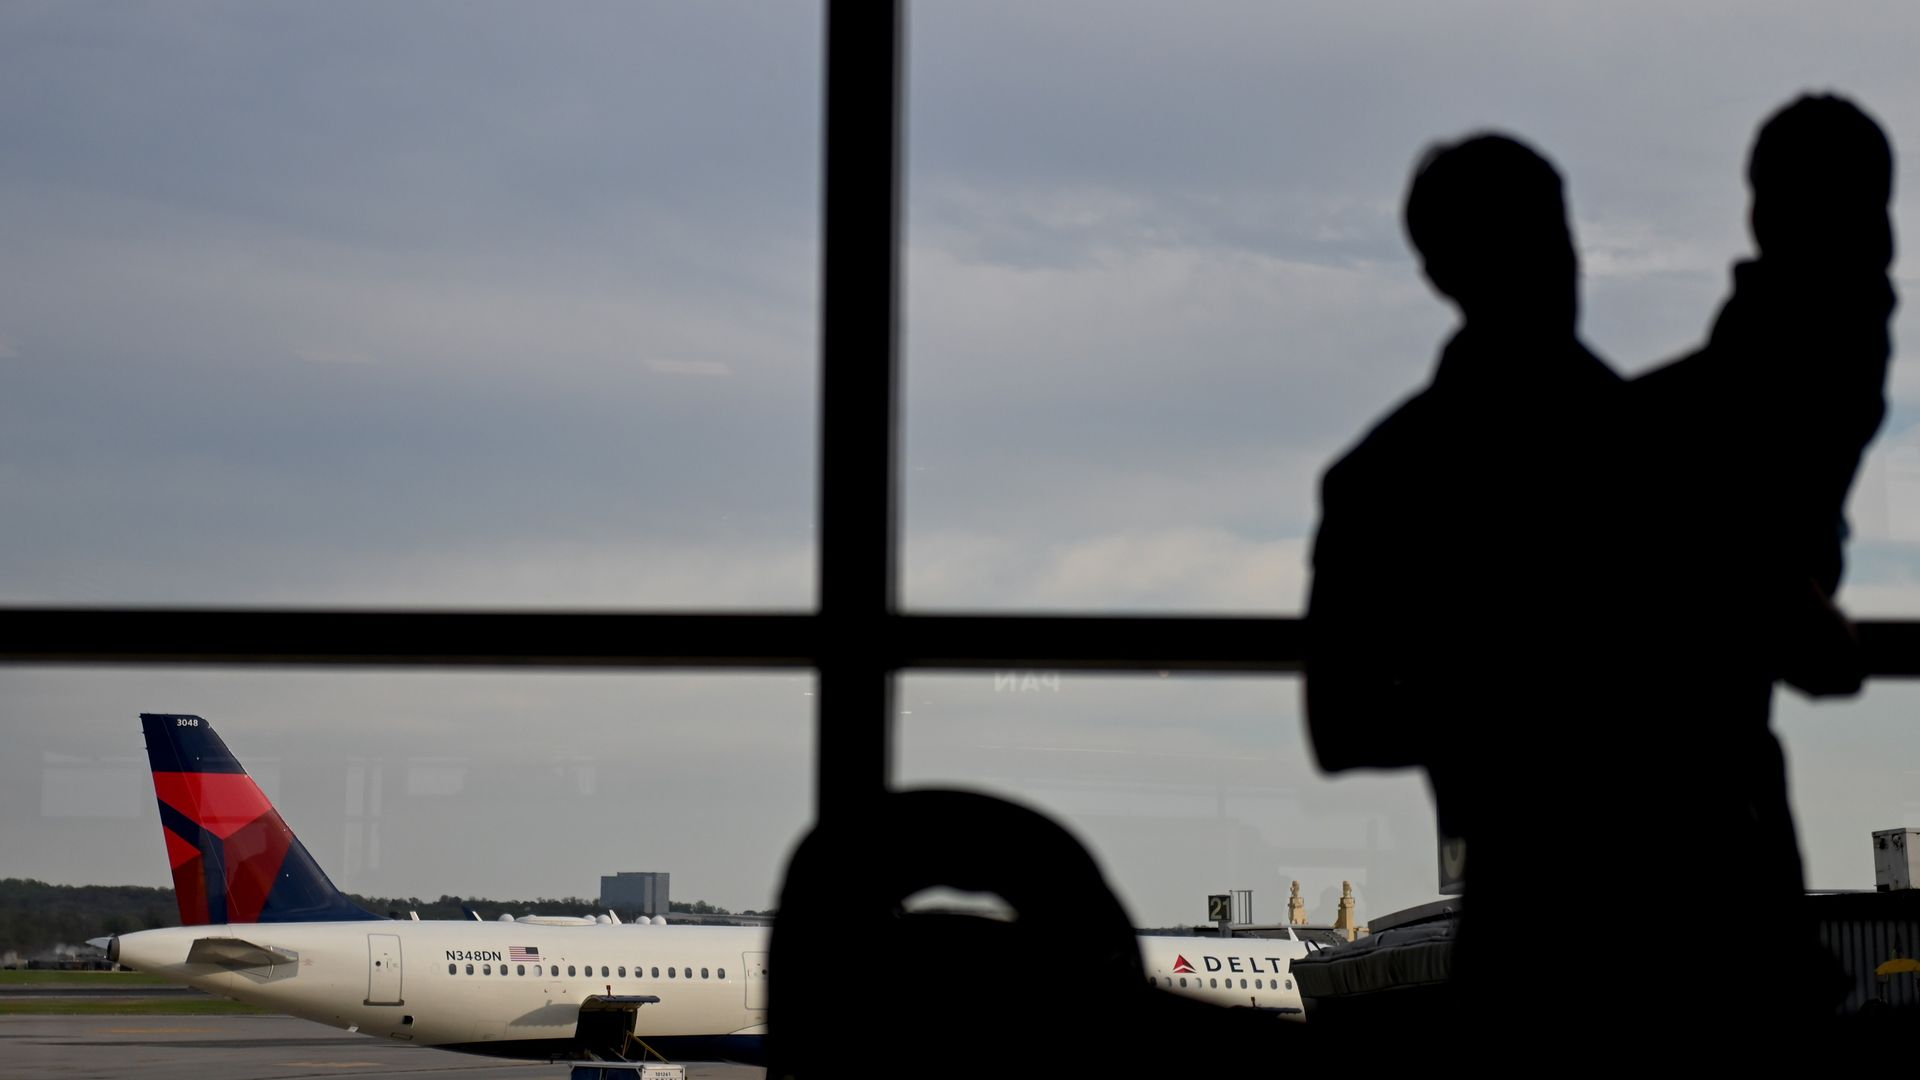 Silhouettes of father and daughter standing at an airport window